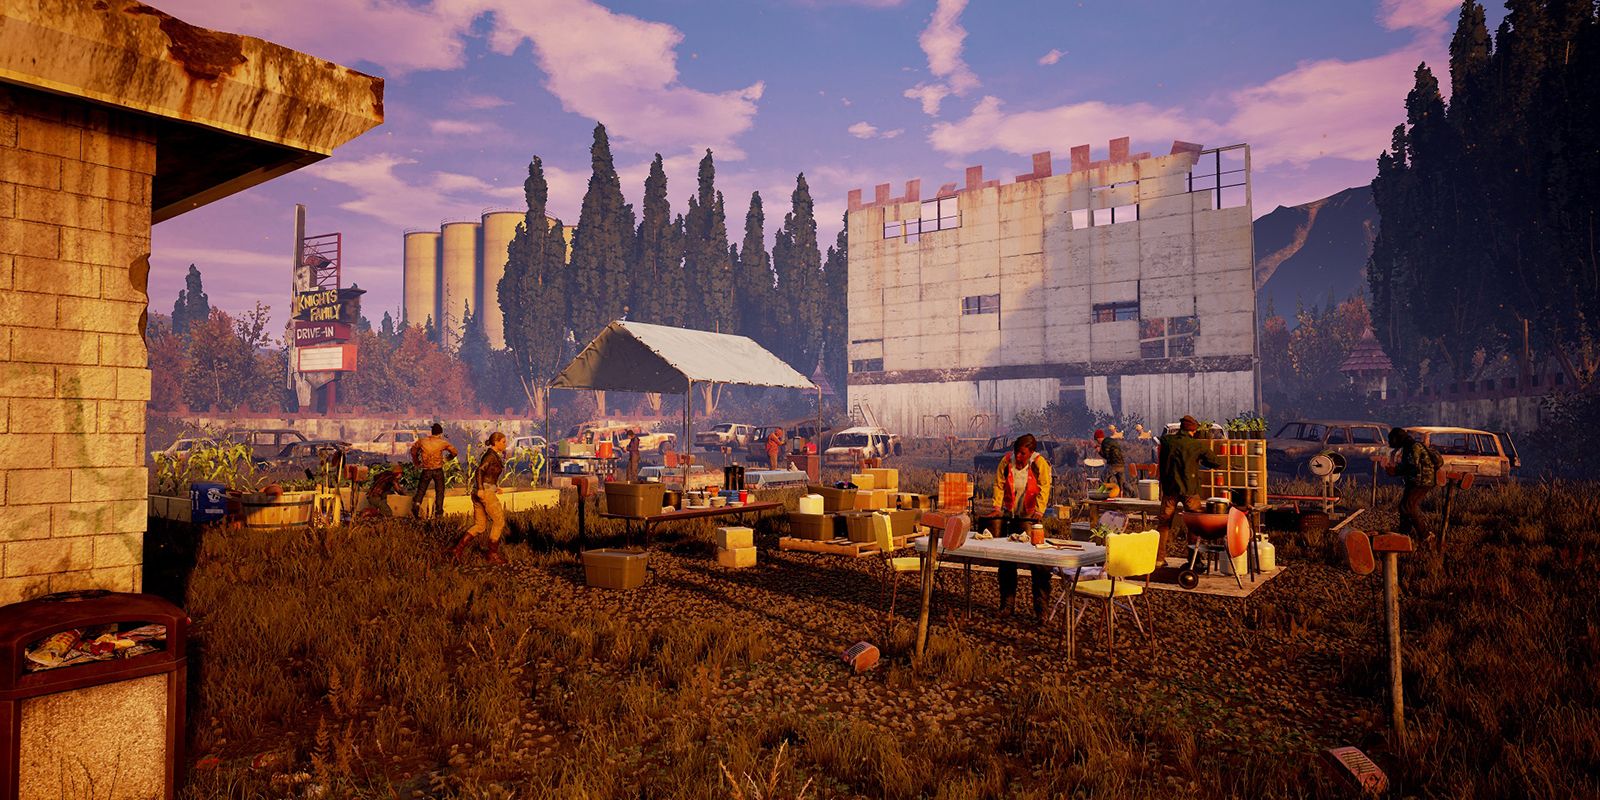 State of Decay 2 Survivors Producing Goods At Base